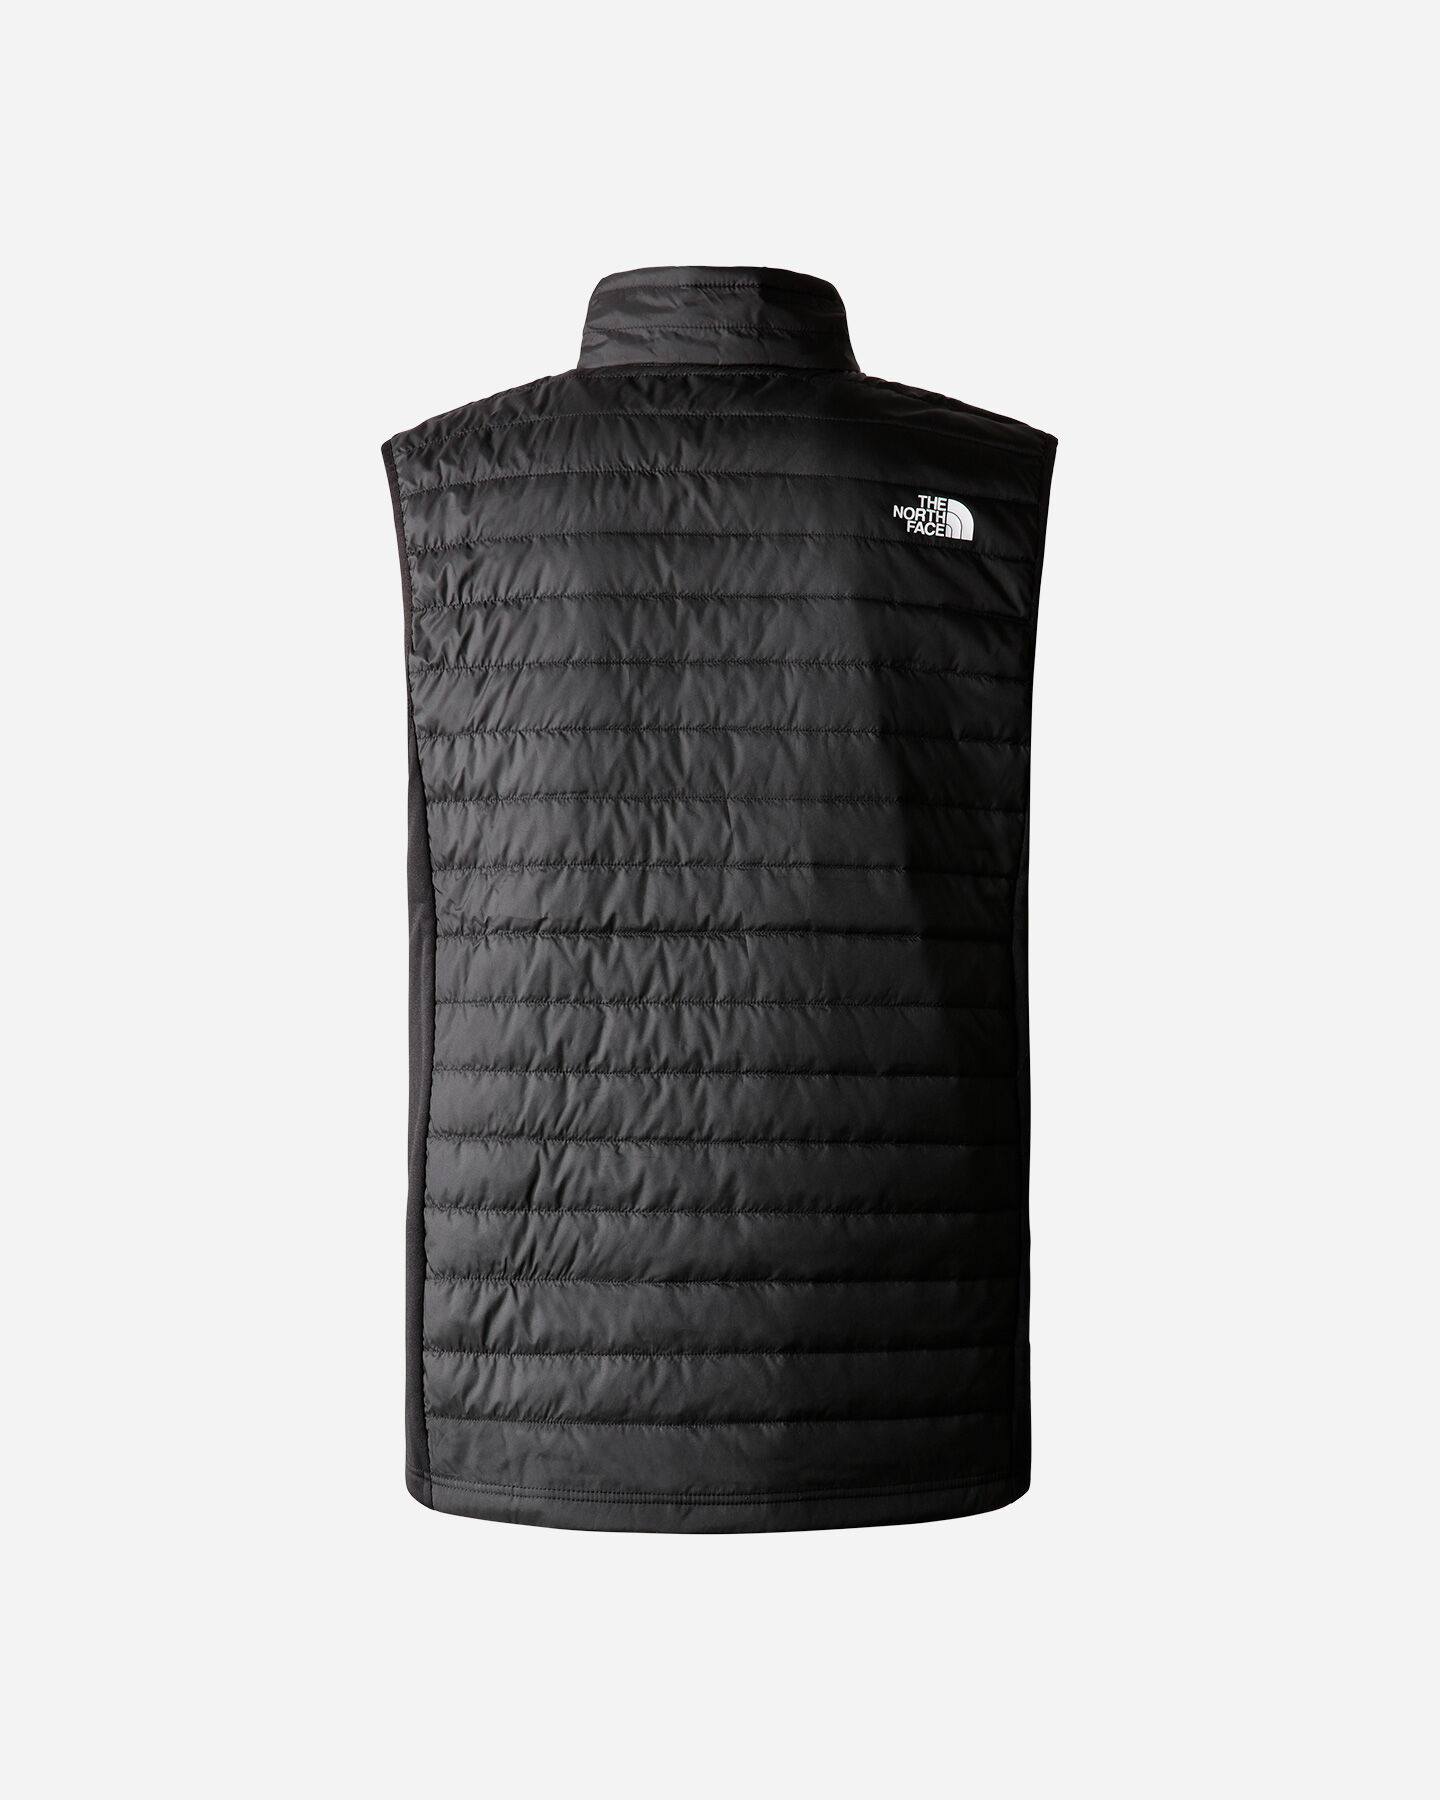  Gilet THE NORTH FACE CANYONLANDS HYBRID M S5475286|JK3|XS scatto 1